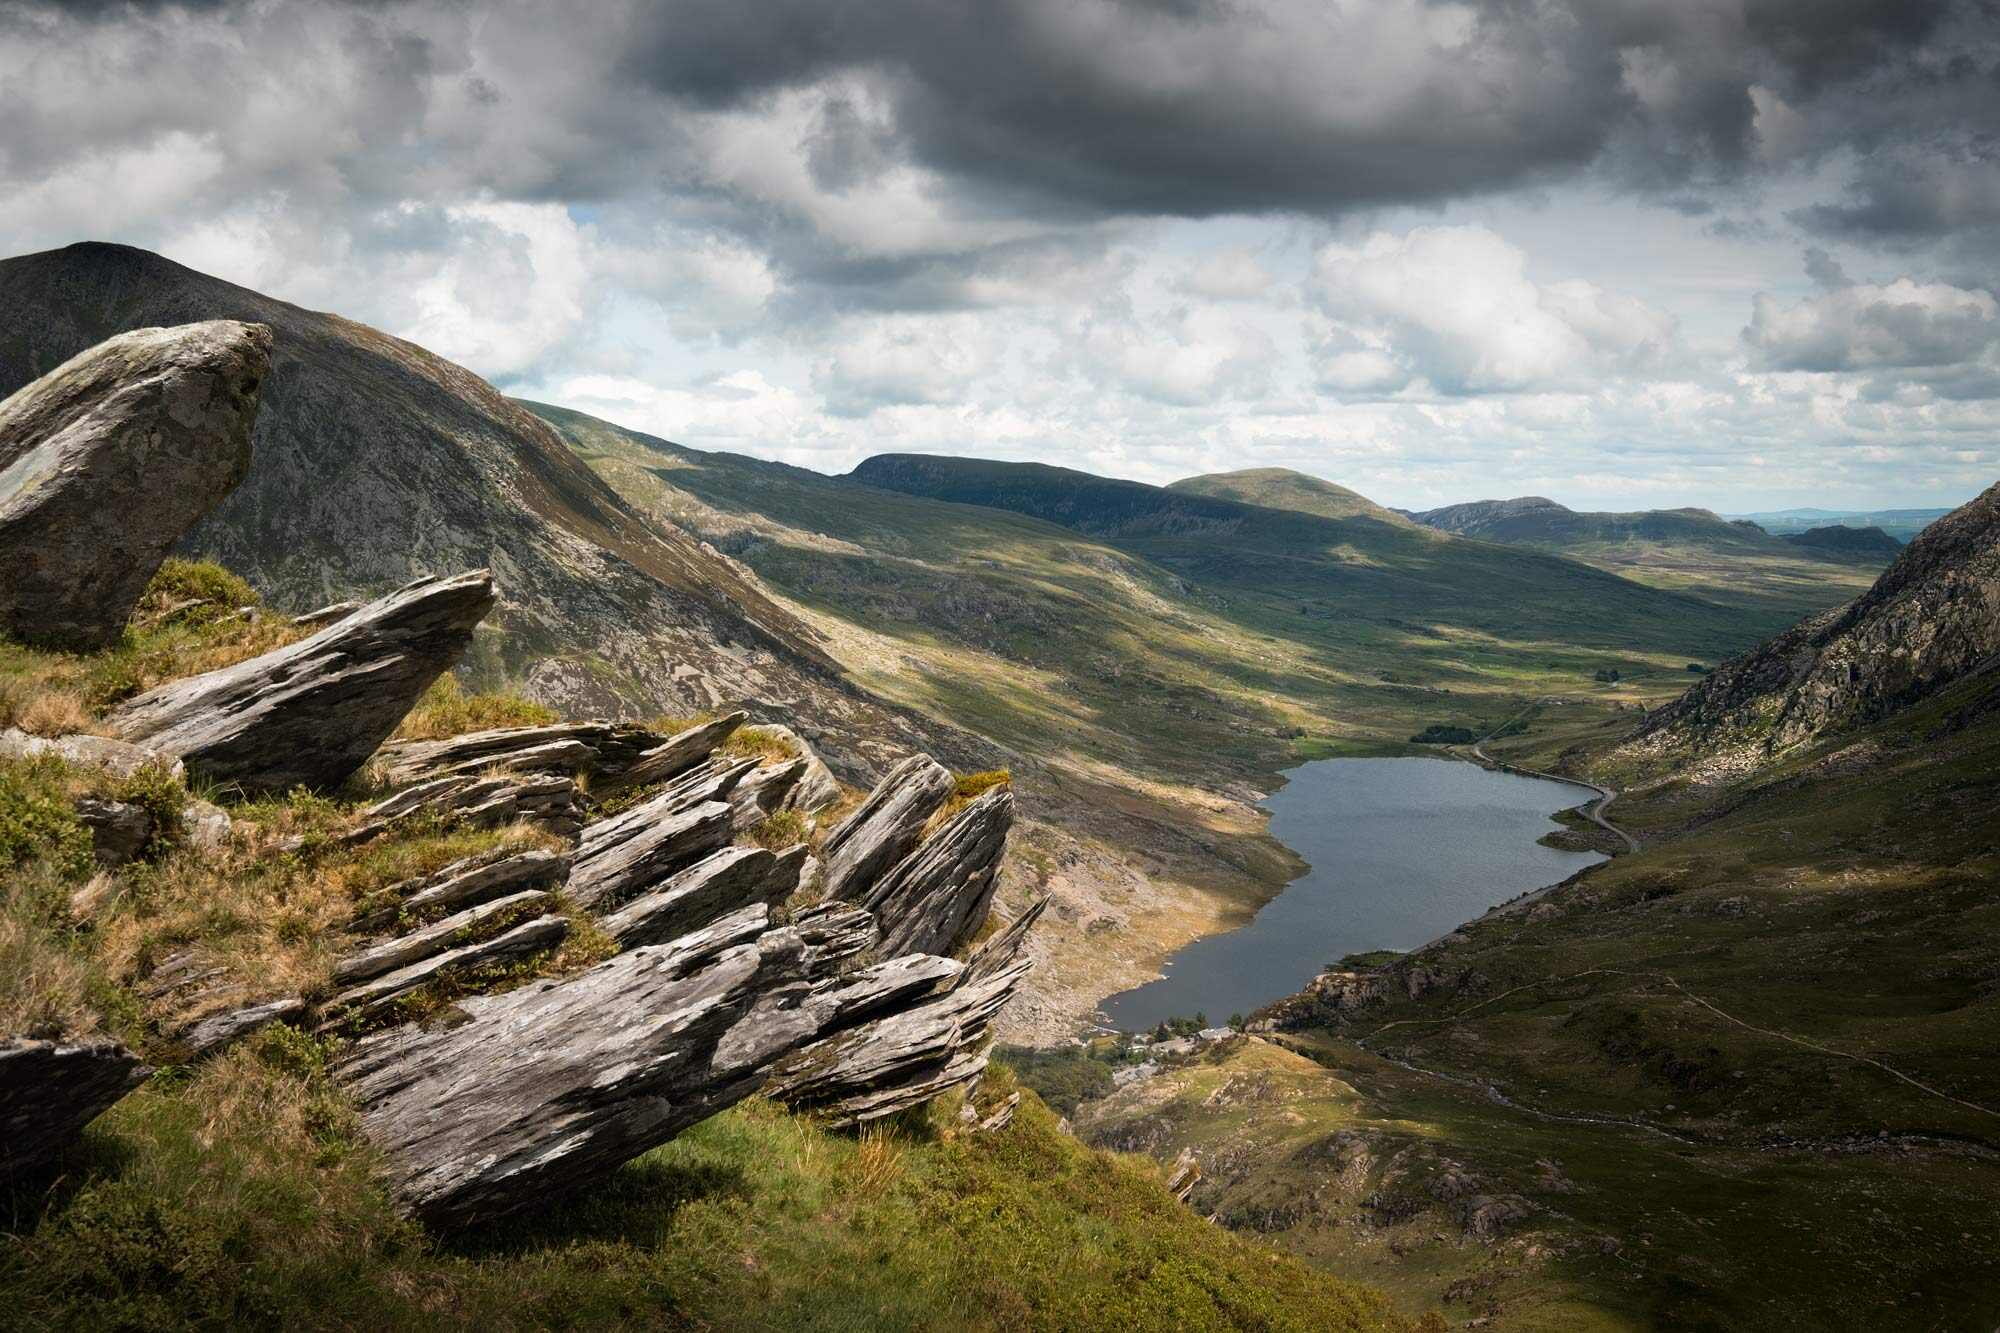 How To See The Devil’s Kitchen, Wales